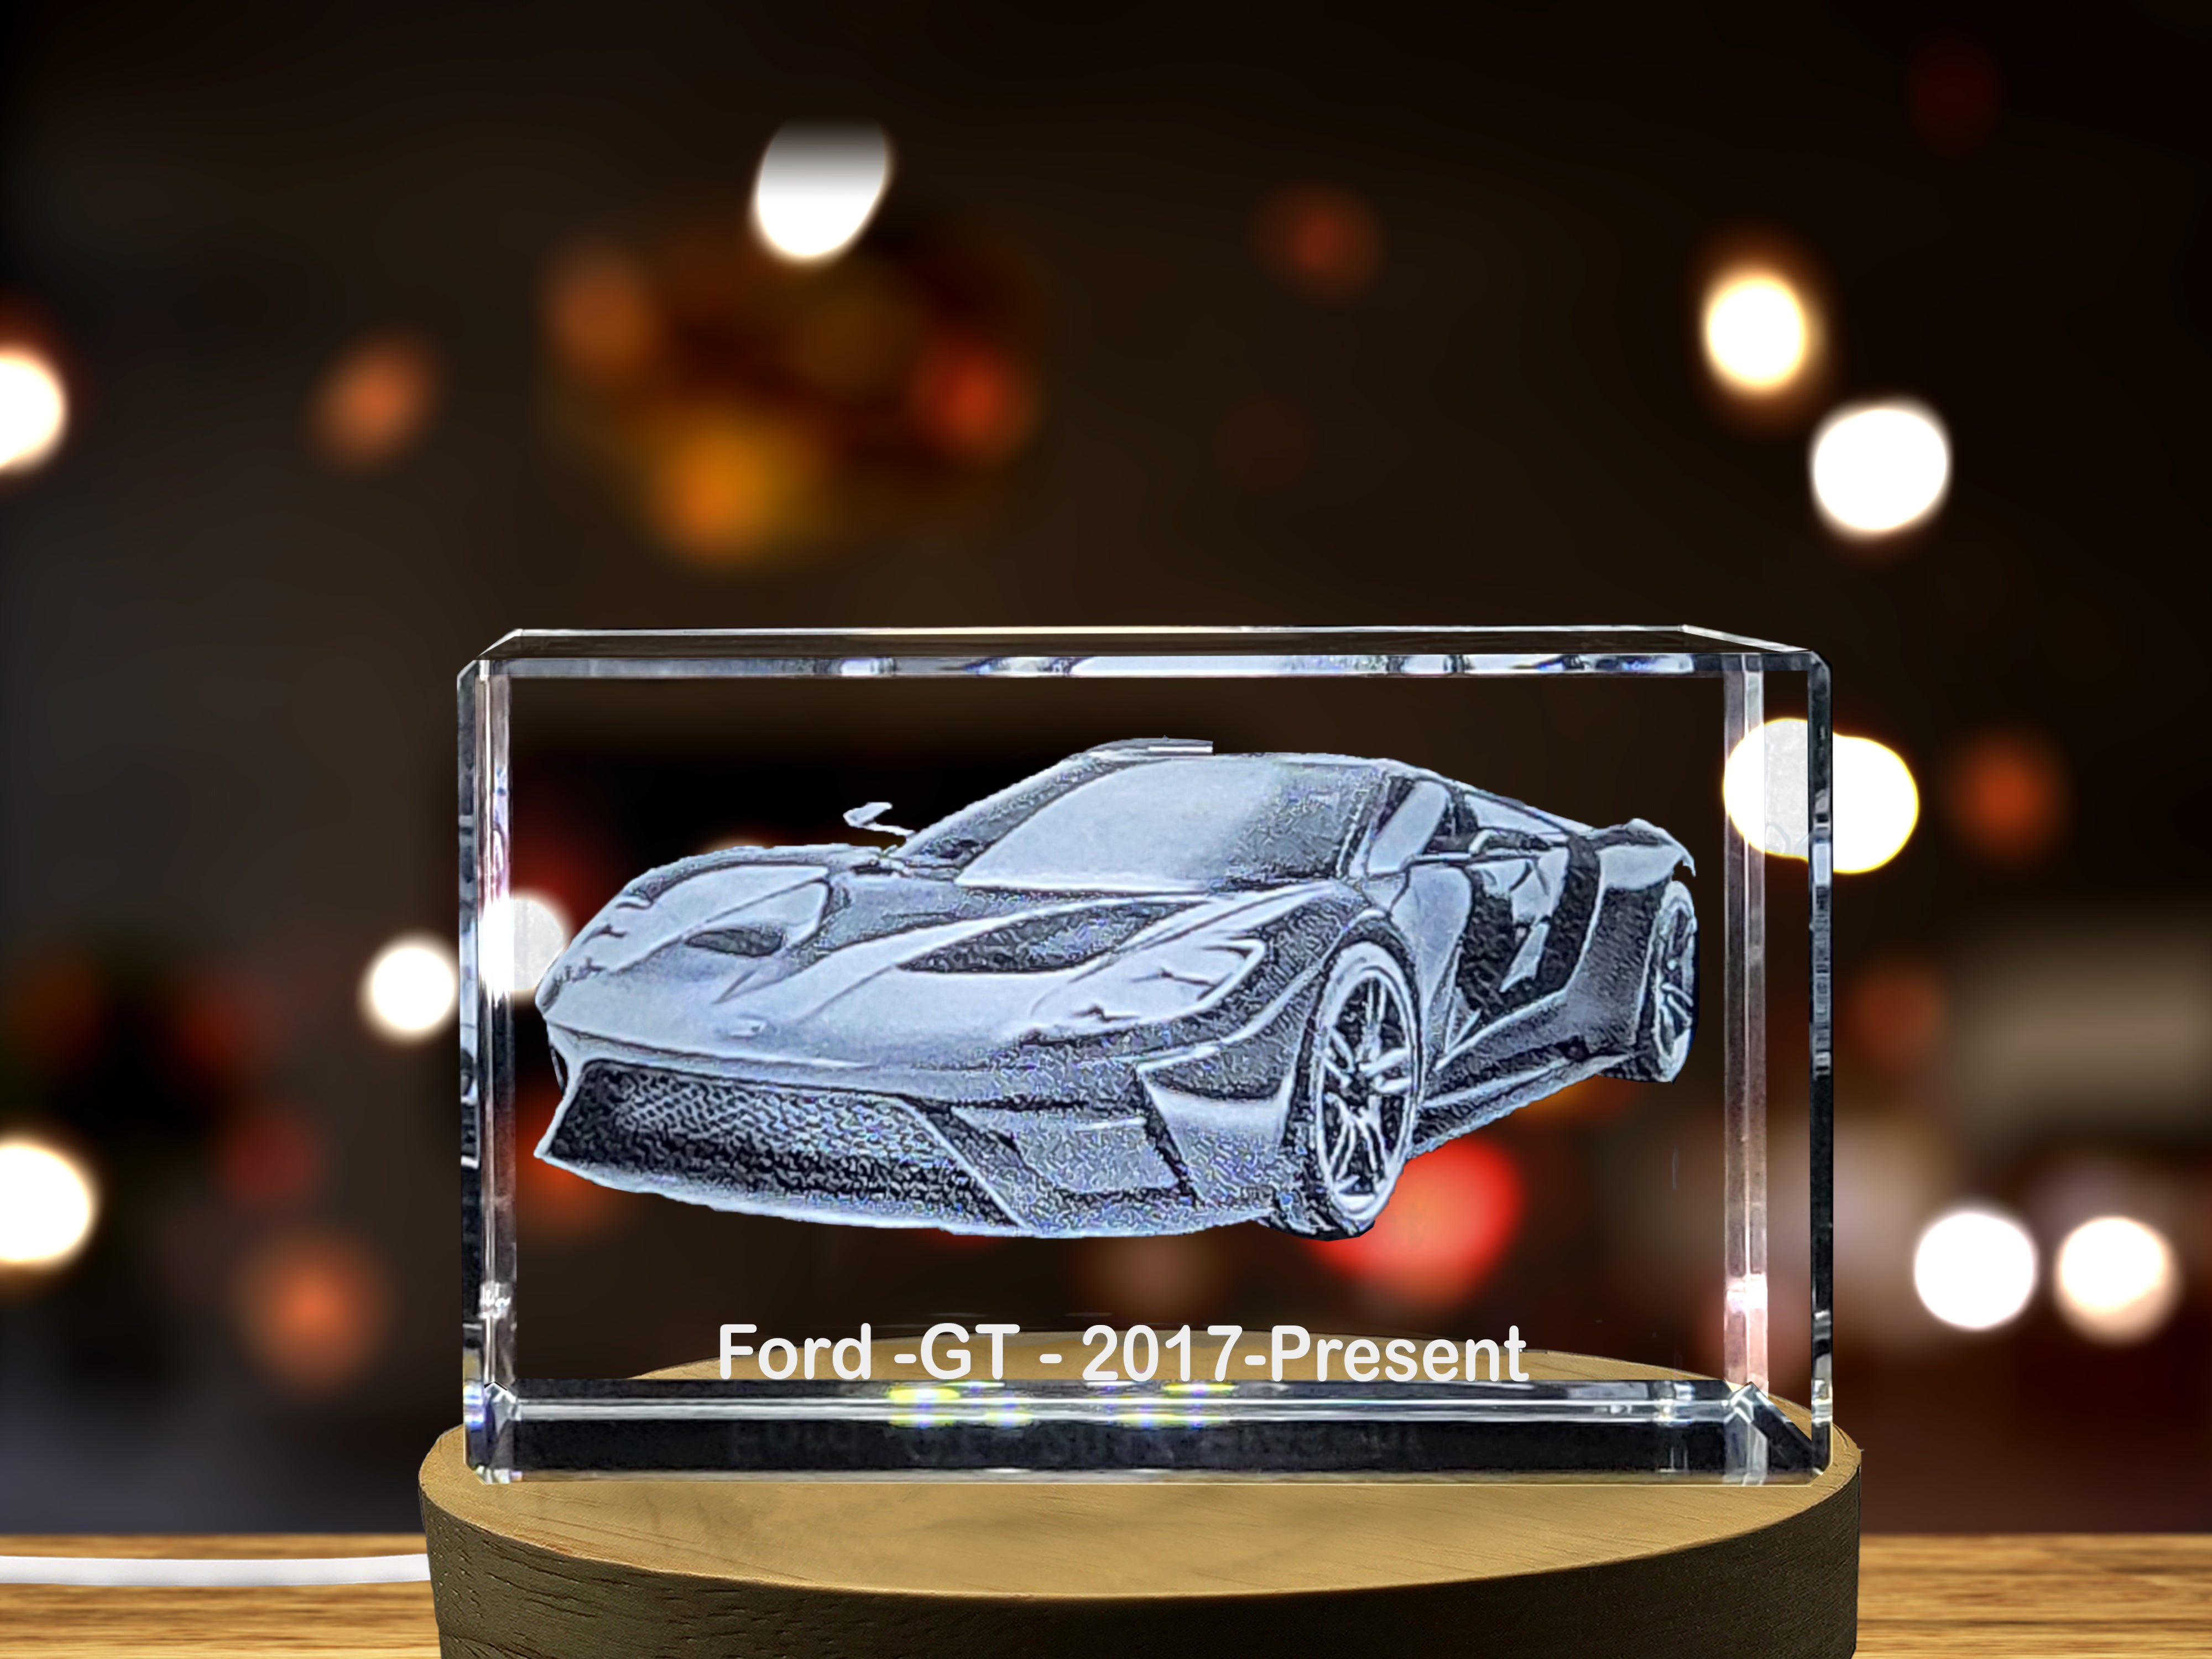 Ford GT (2017-Present) - American Muscle Reimagined in 3D Engraved Crystal A&B Crystal Collection